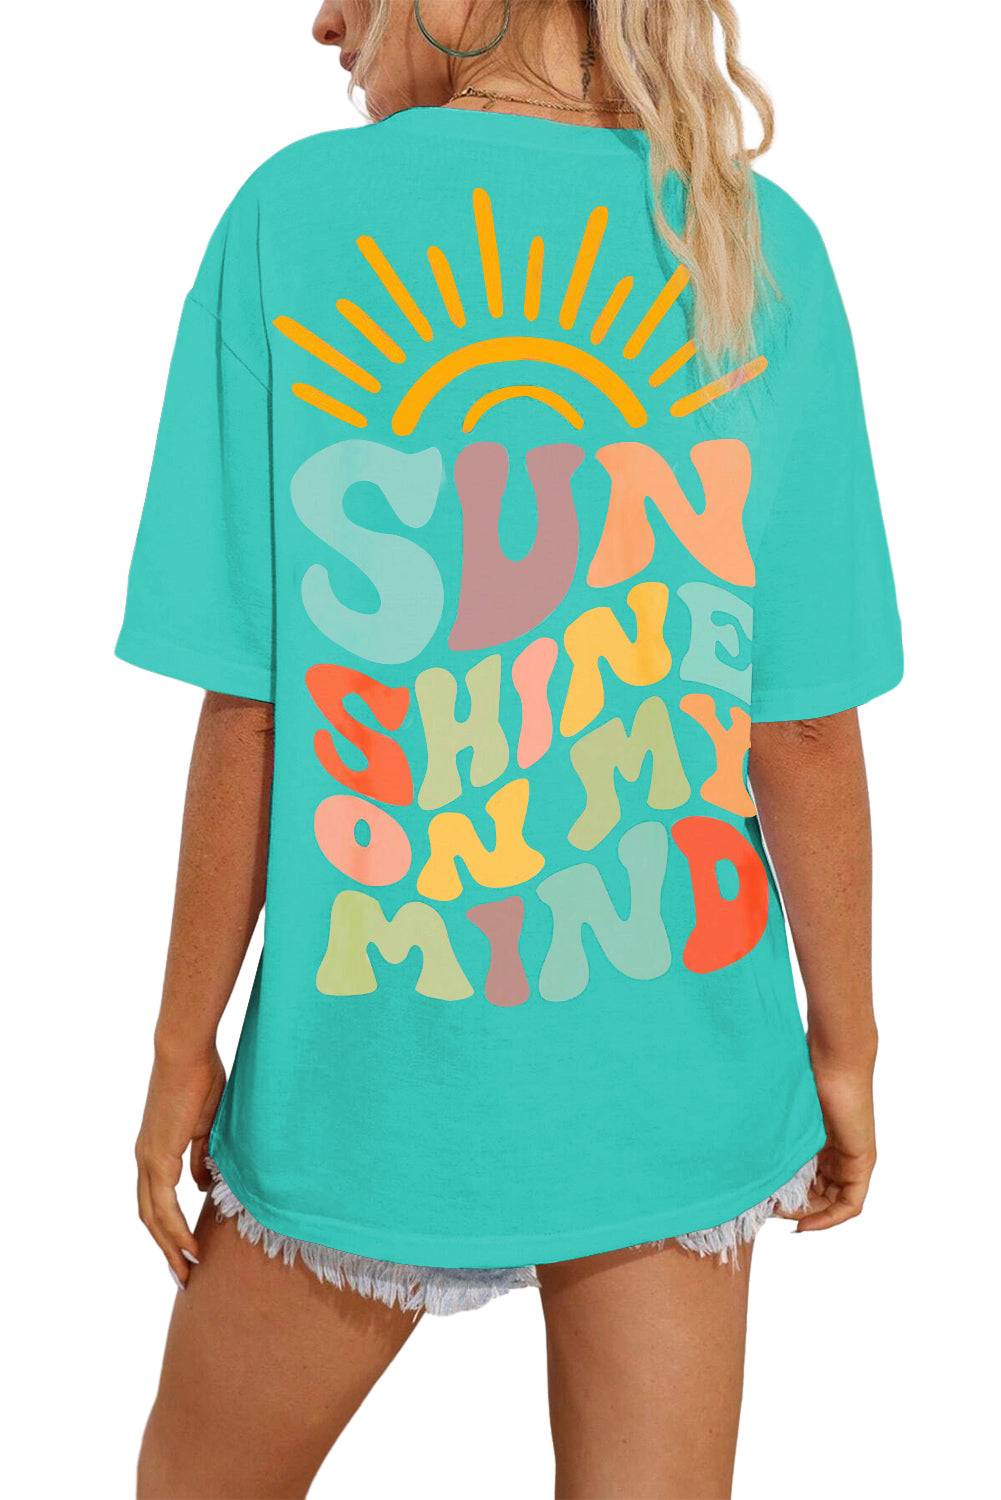 a woman wearing a turquoise shirt with the words sun shine on it